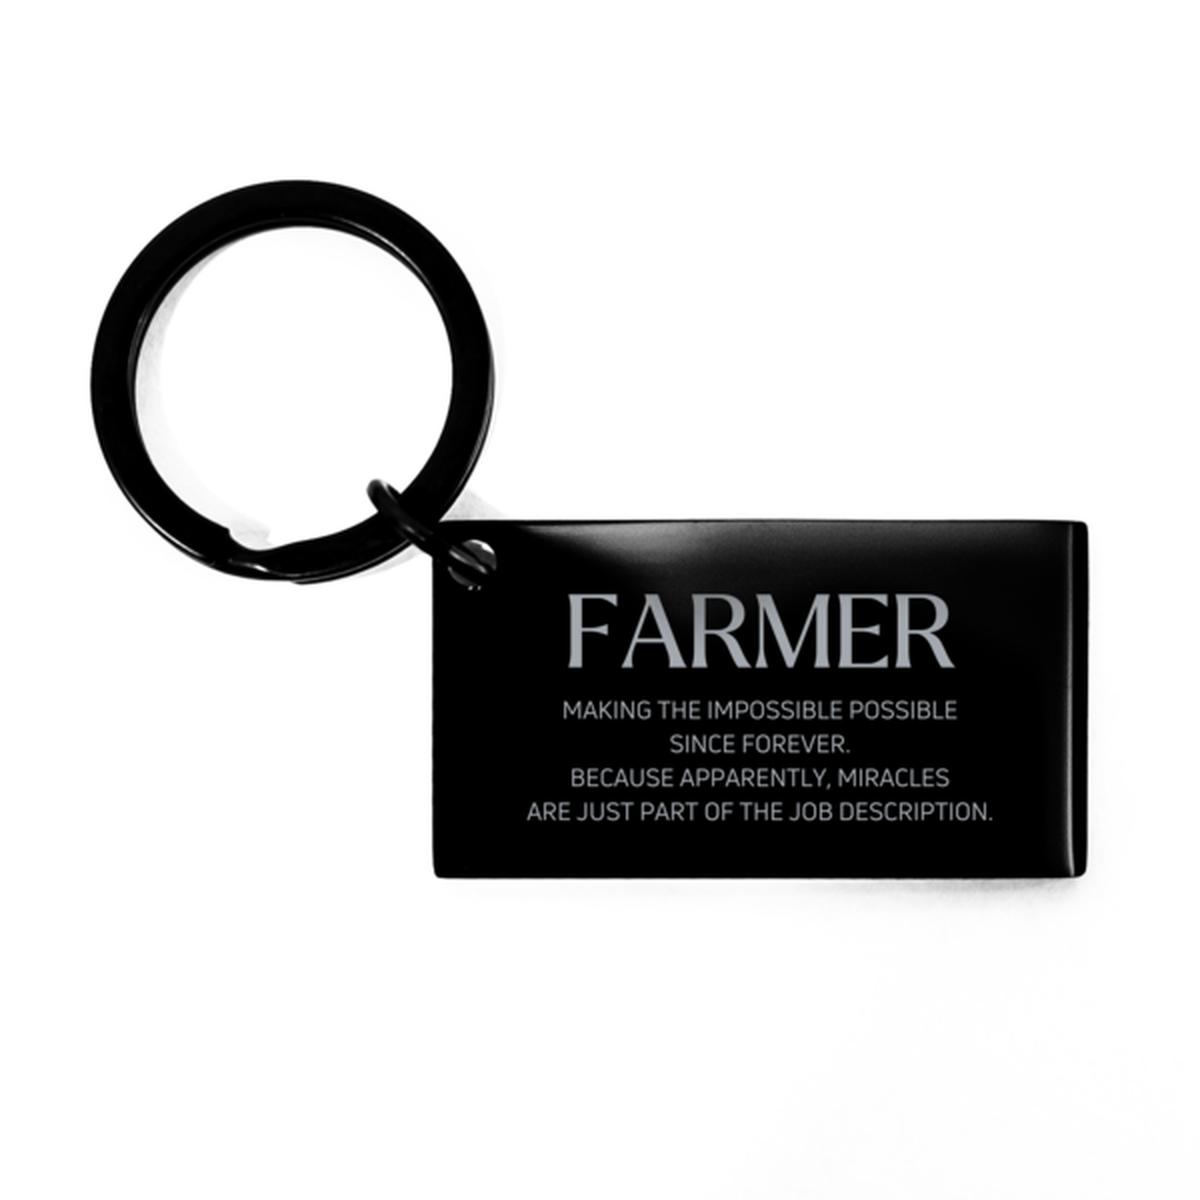 Funny Farmer Gifts, Miracles are just part of the job description, Inspirational Birthday Keychain For Farmer, Men, Women, Coworkers, Friends, Boss